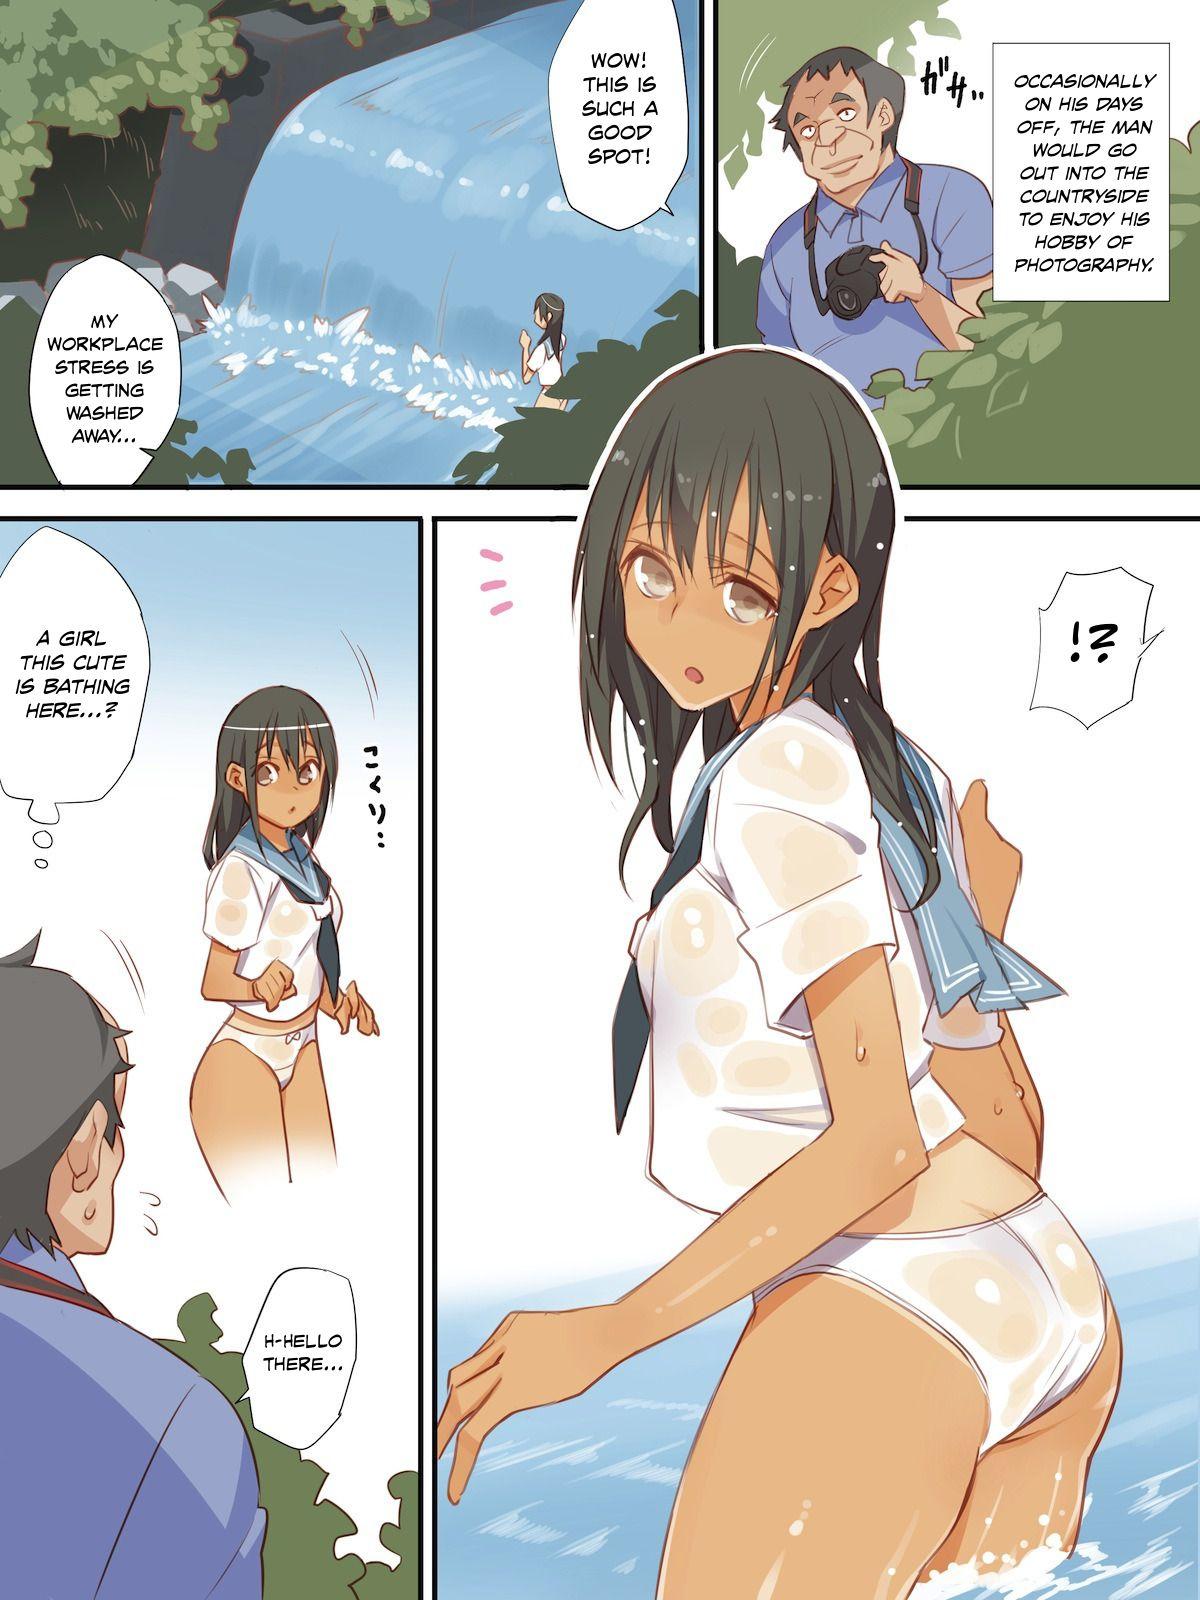 Hung Inaka no Musume ga Sex o Oboetara | When Country Girls Learn About Sex Style - Page 2